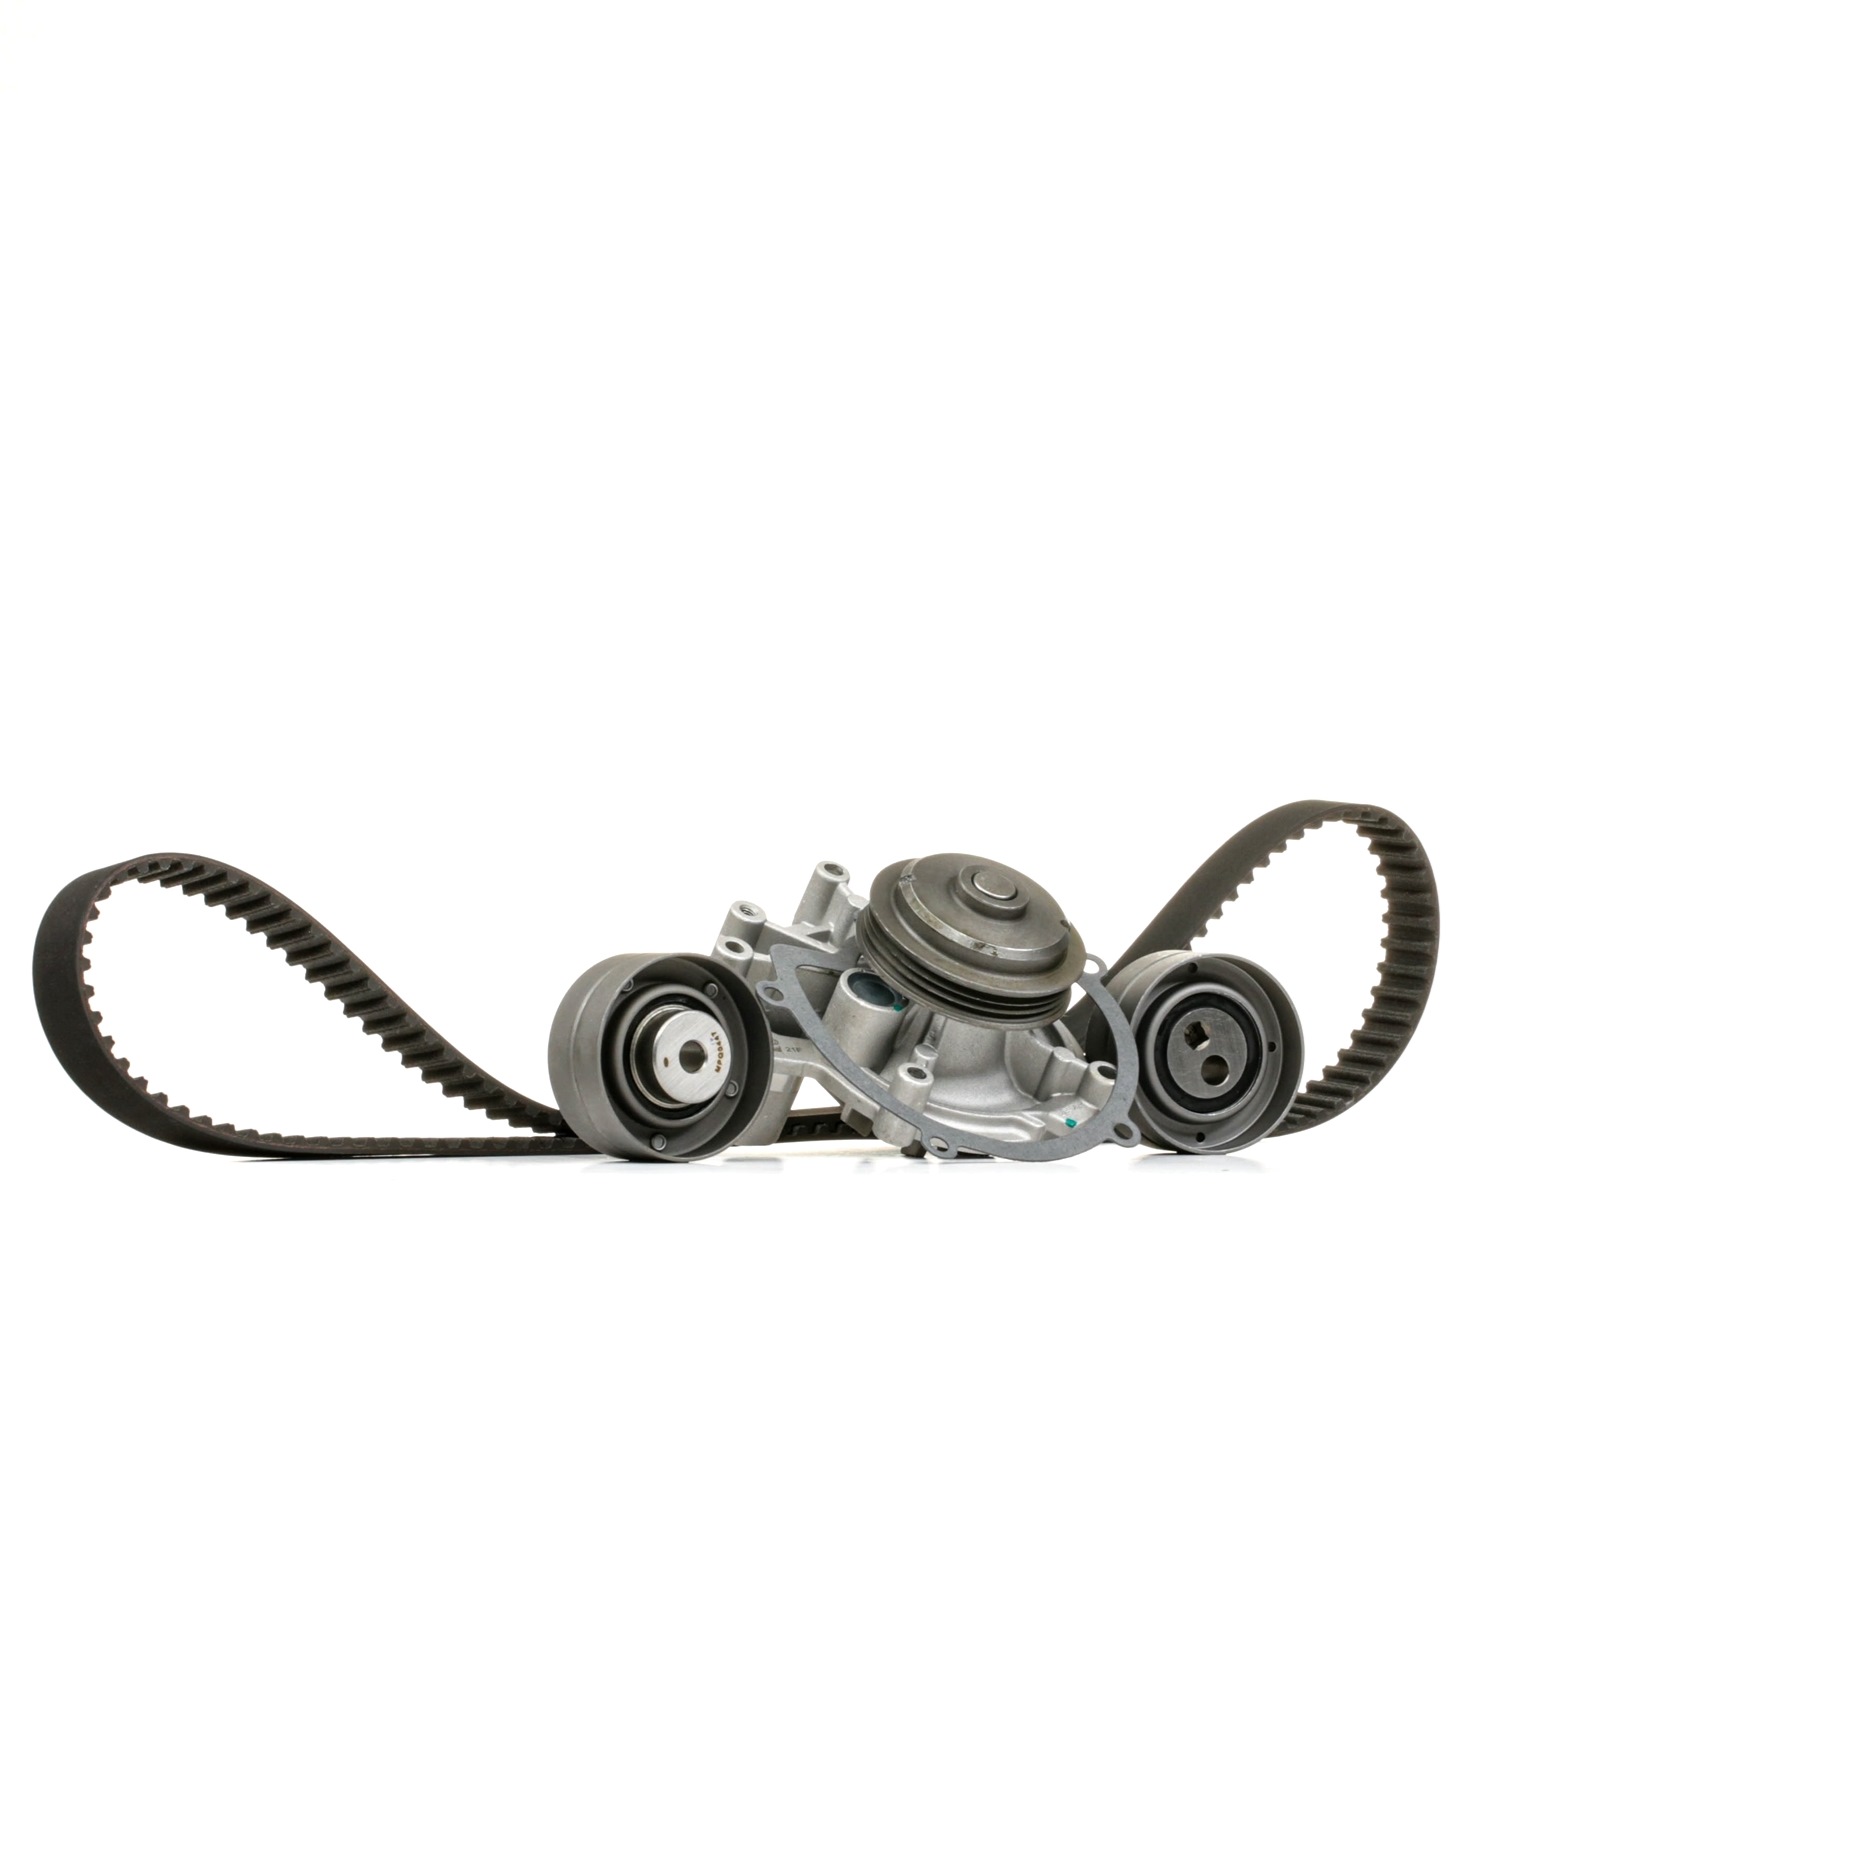 MAGNETI MARELLI 132011160004 Water pump and timing belt kit FORD USA experience and price